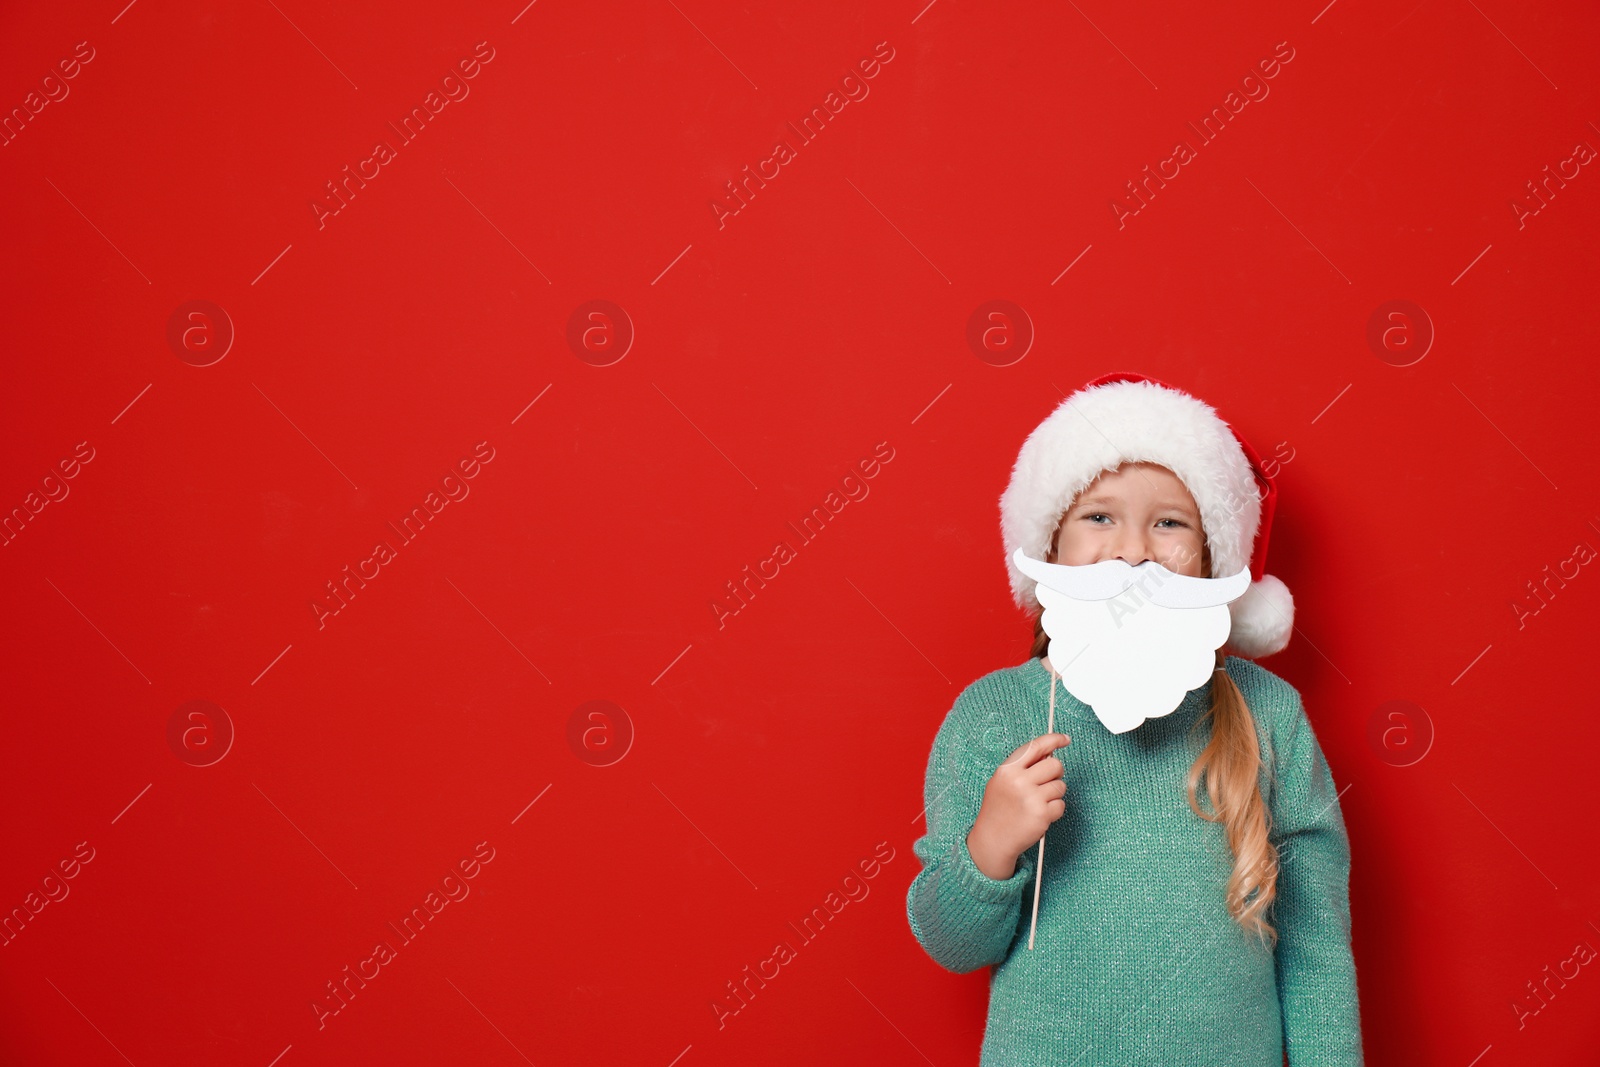 Image of Cute little girl with Santa hat and white beard prop on red background, space for text. Christmas celebration